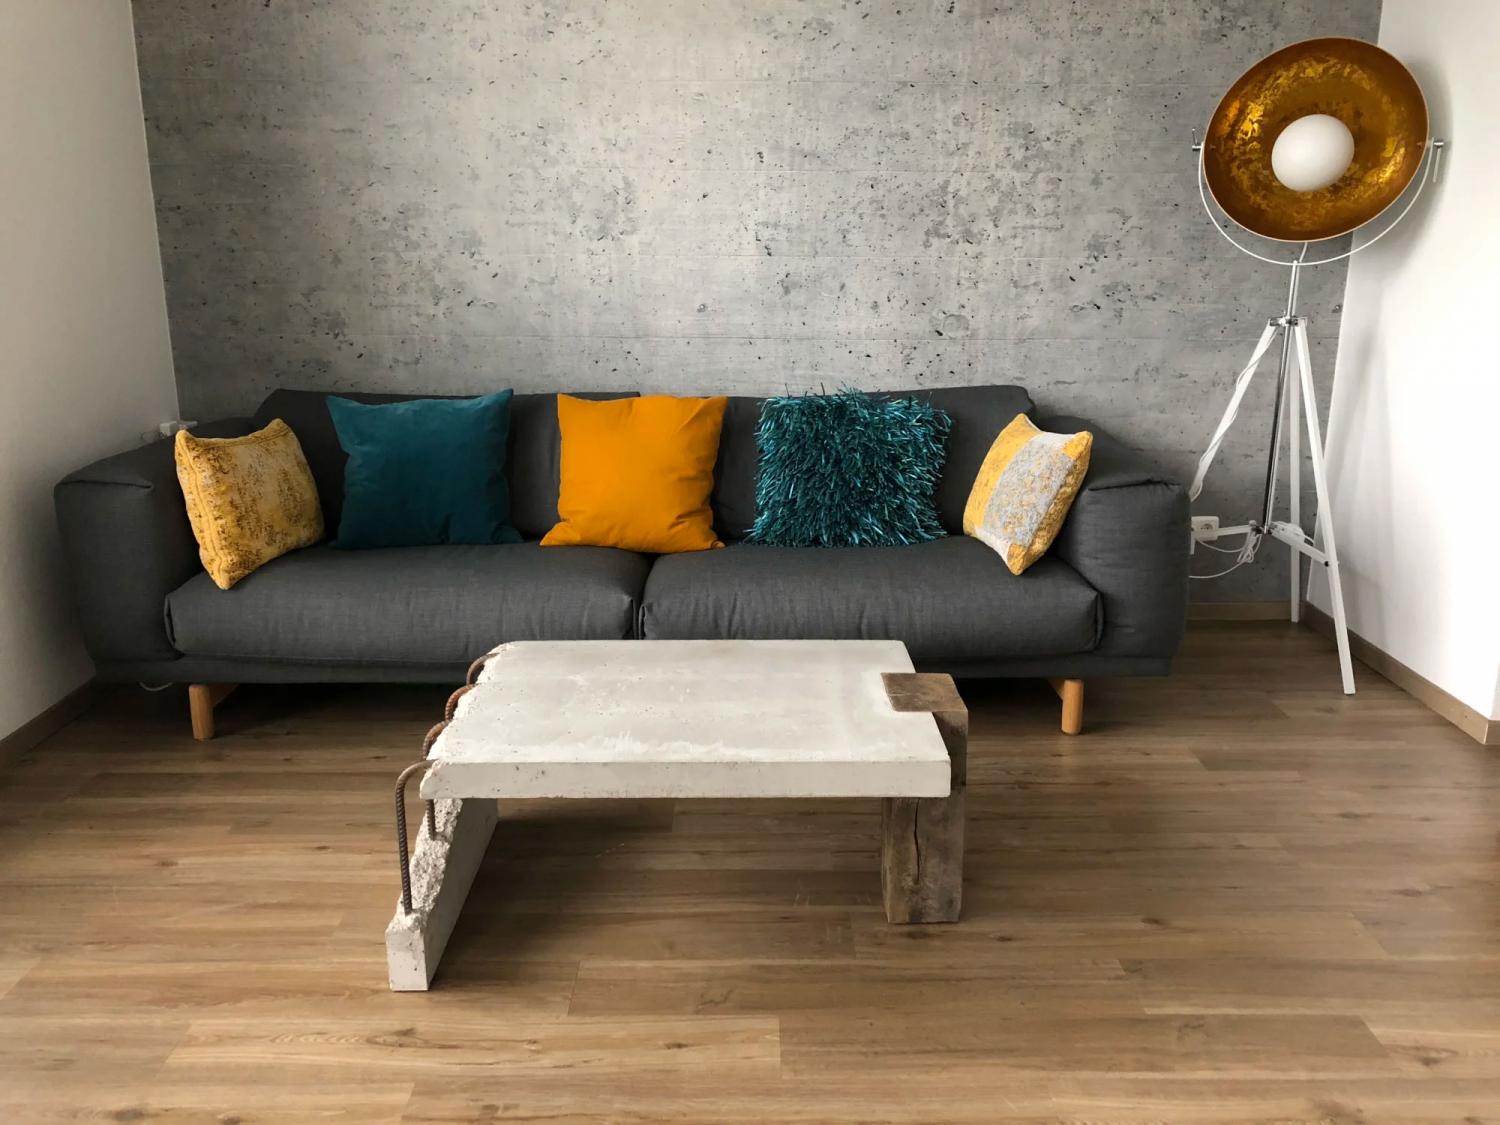 White ceramic concrete coffee table besides a grey sofa on a wooden floor